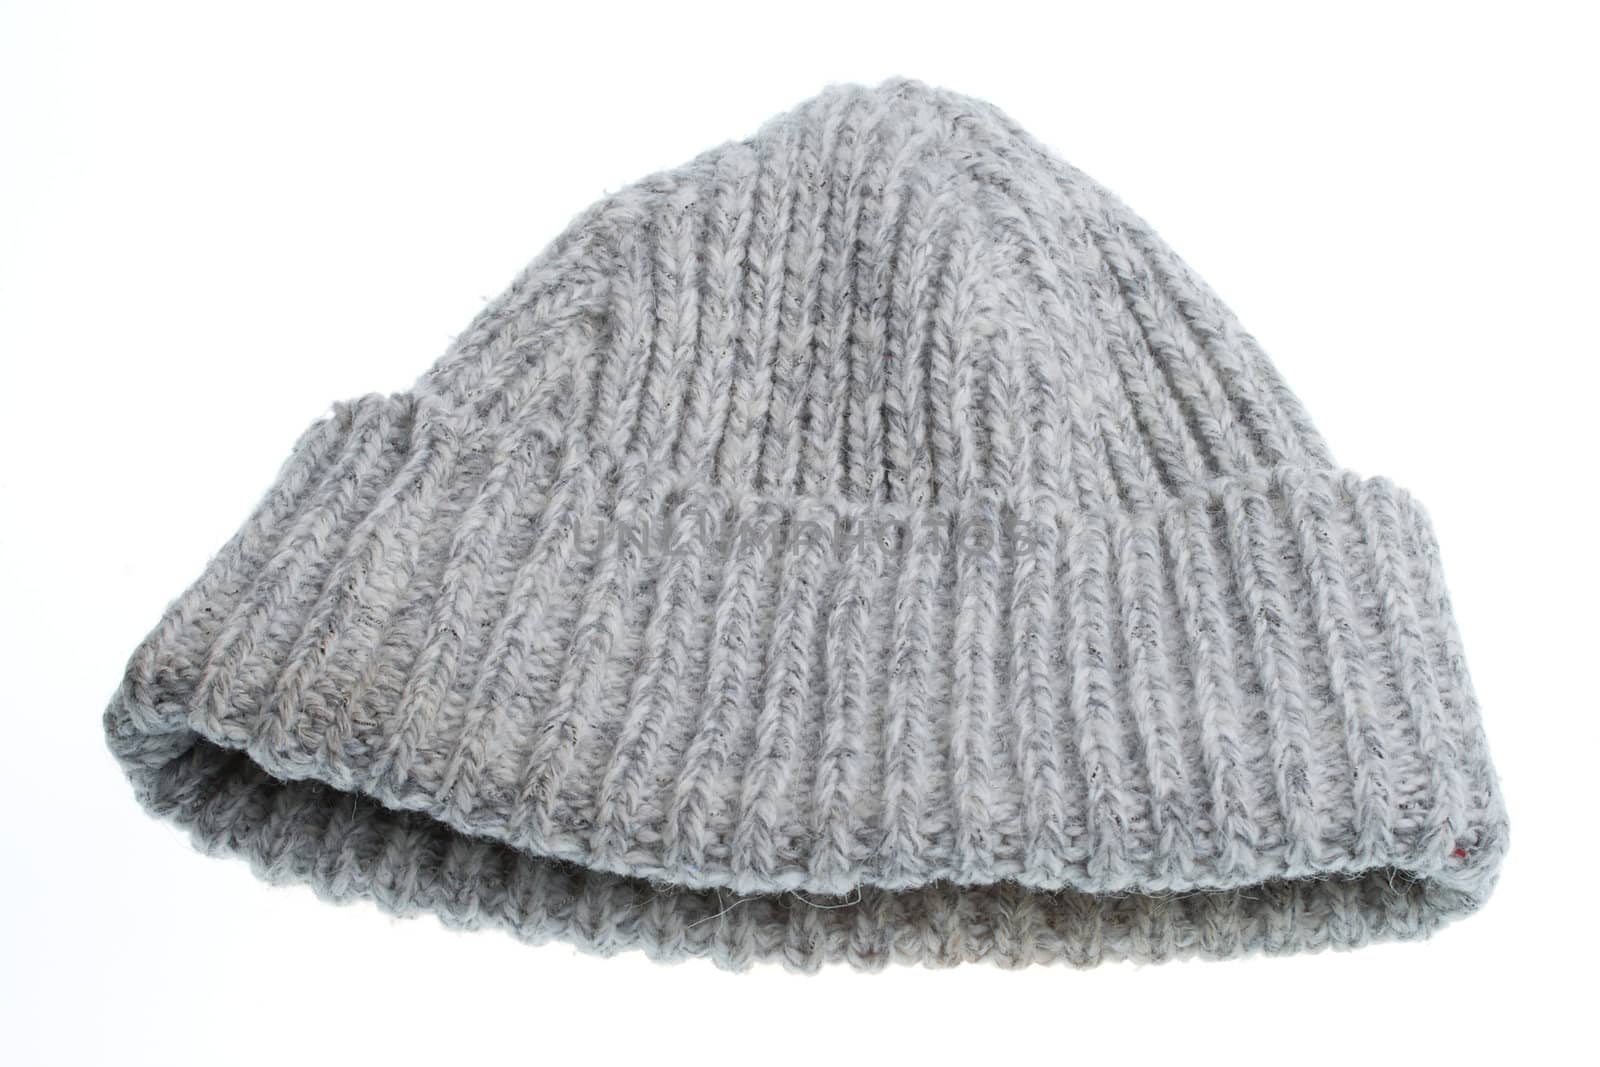 gray woolen winter hat, isolated on white